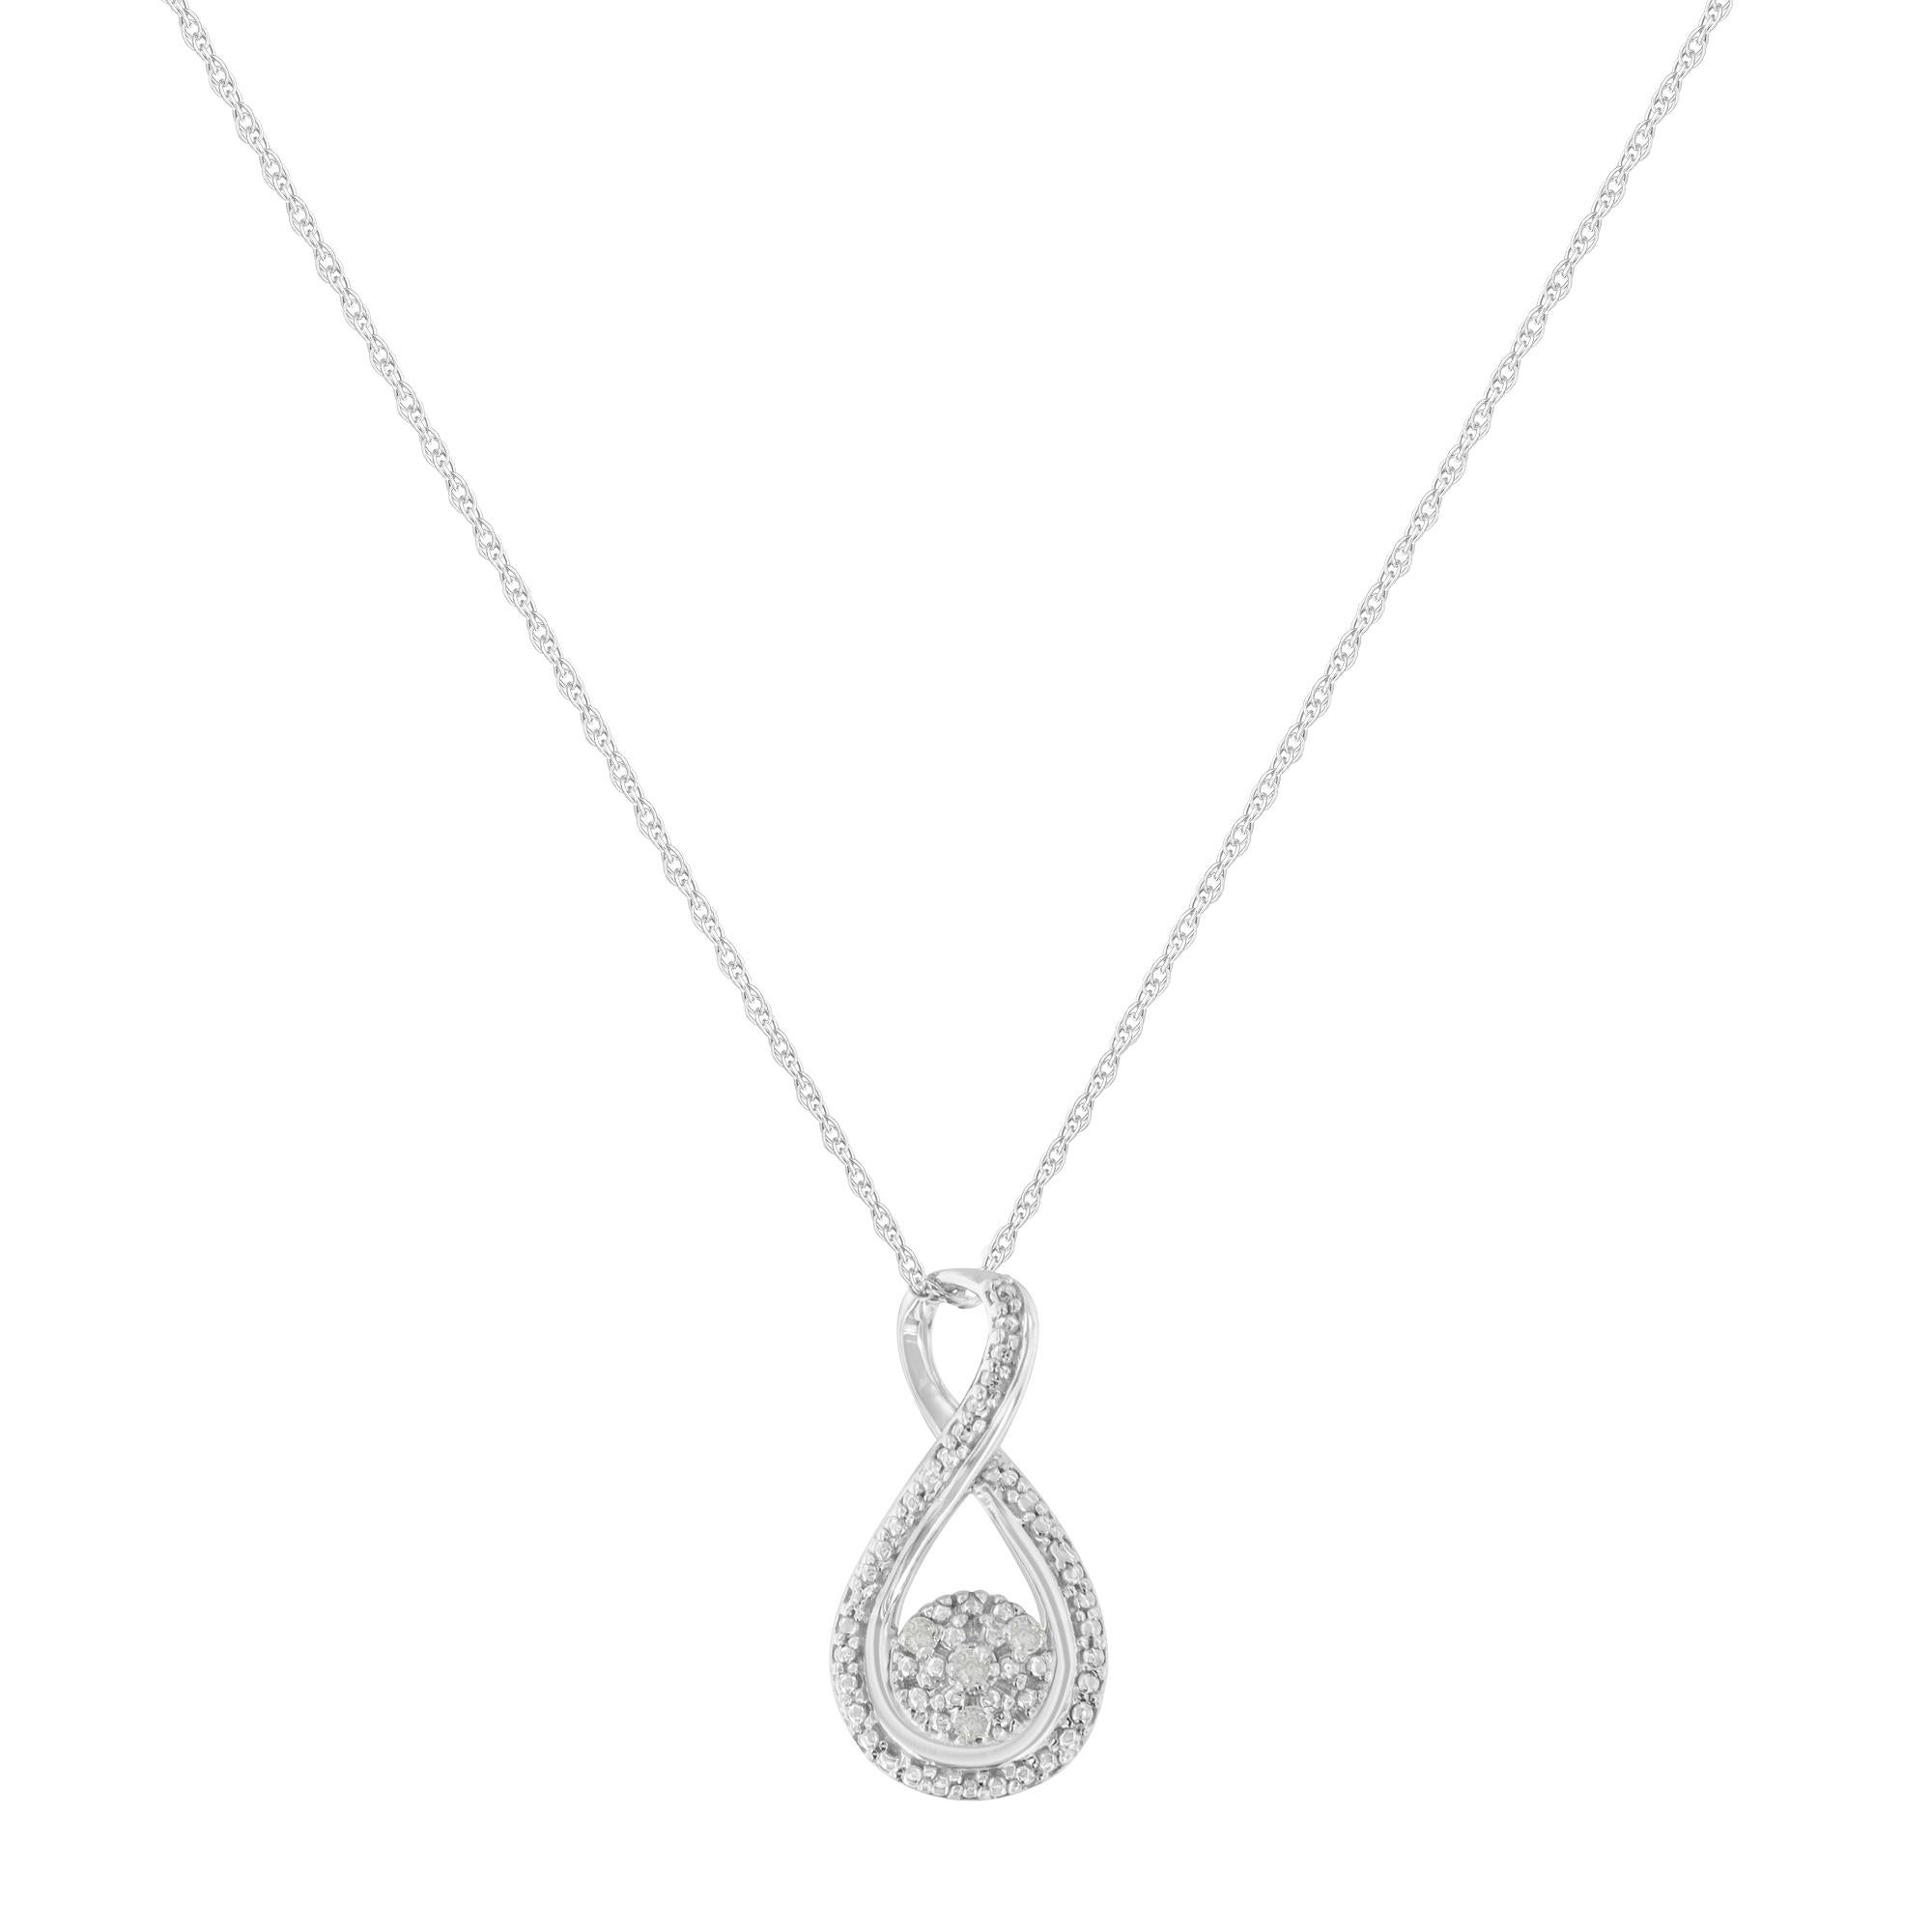 Celebrate someone you love with this stunning diamond infinity pendant necklace. This diamond necklace features an infinity swirl suspending a silver cluster studded with round, rose-cut, promo quality diamonds, which are milky and cloudy in nature.